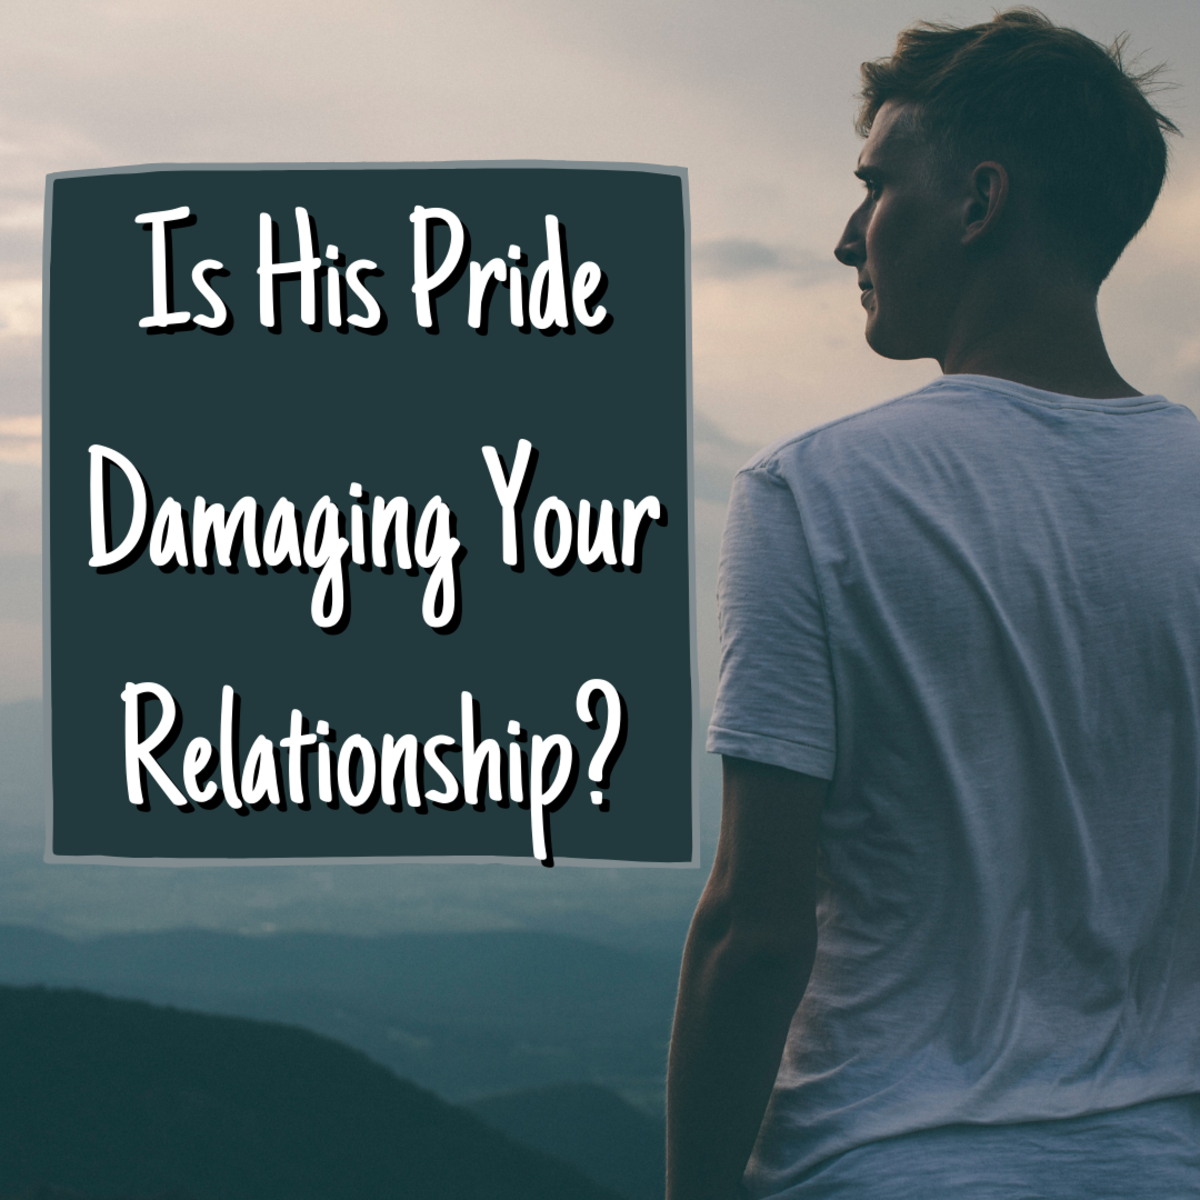 Do you find yourself saying "my boyfriend has too much pride"? This article will help you learn how to communicate effectively with him as well as confront uncertainty.